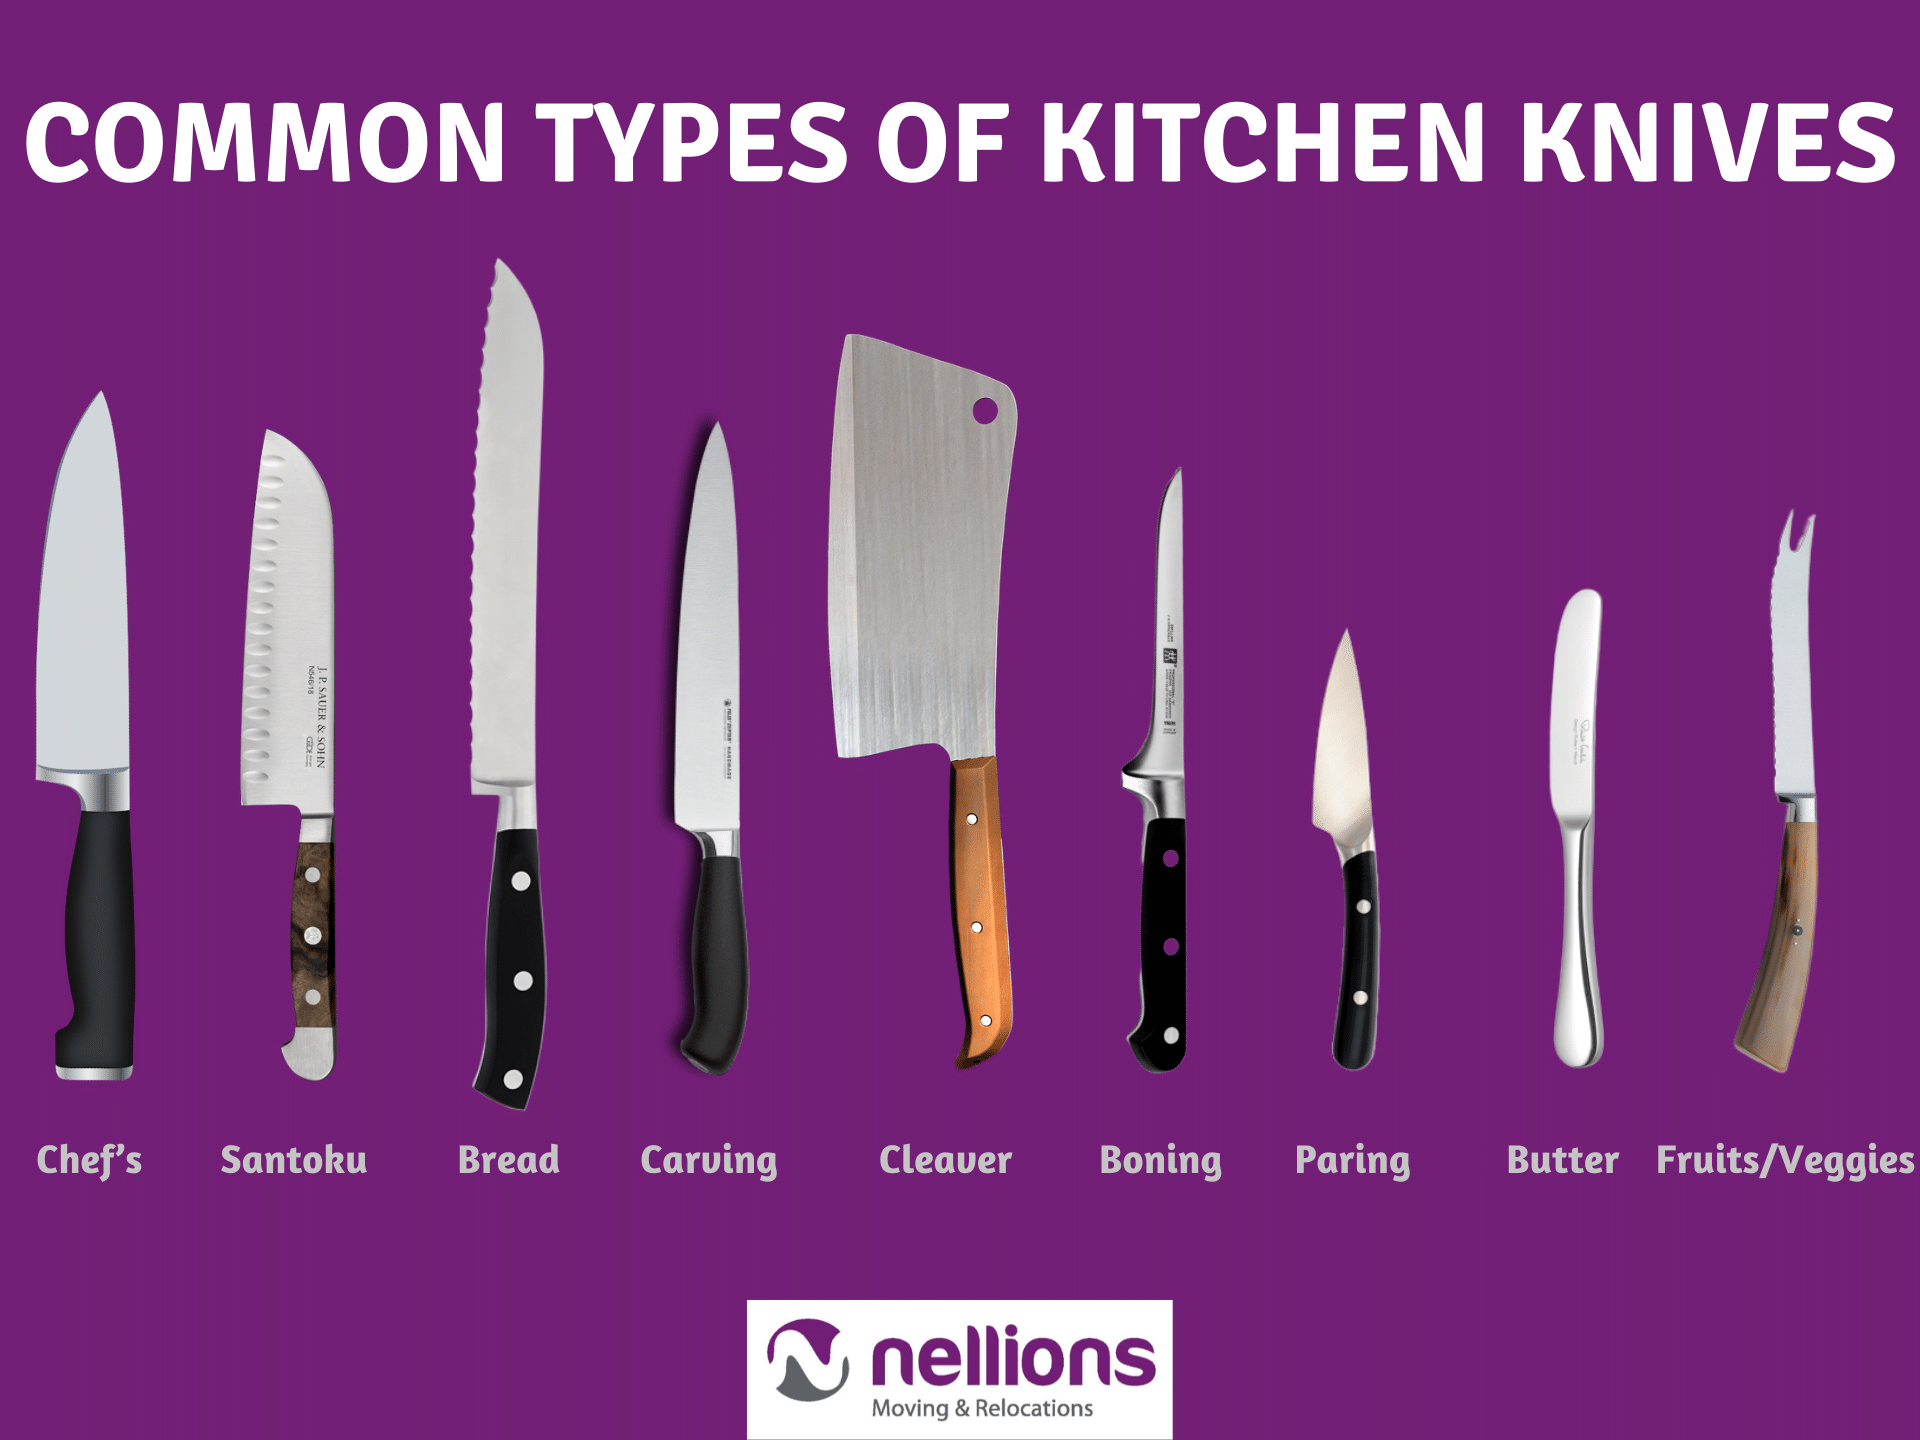 COMMON TYPES OF KITCHEN KNIVES 2 